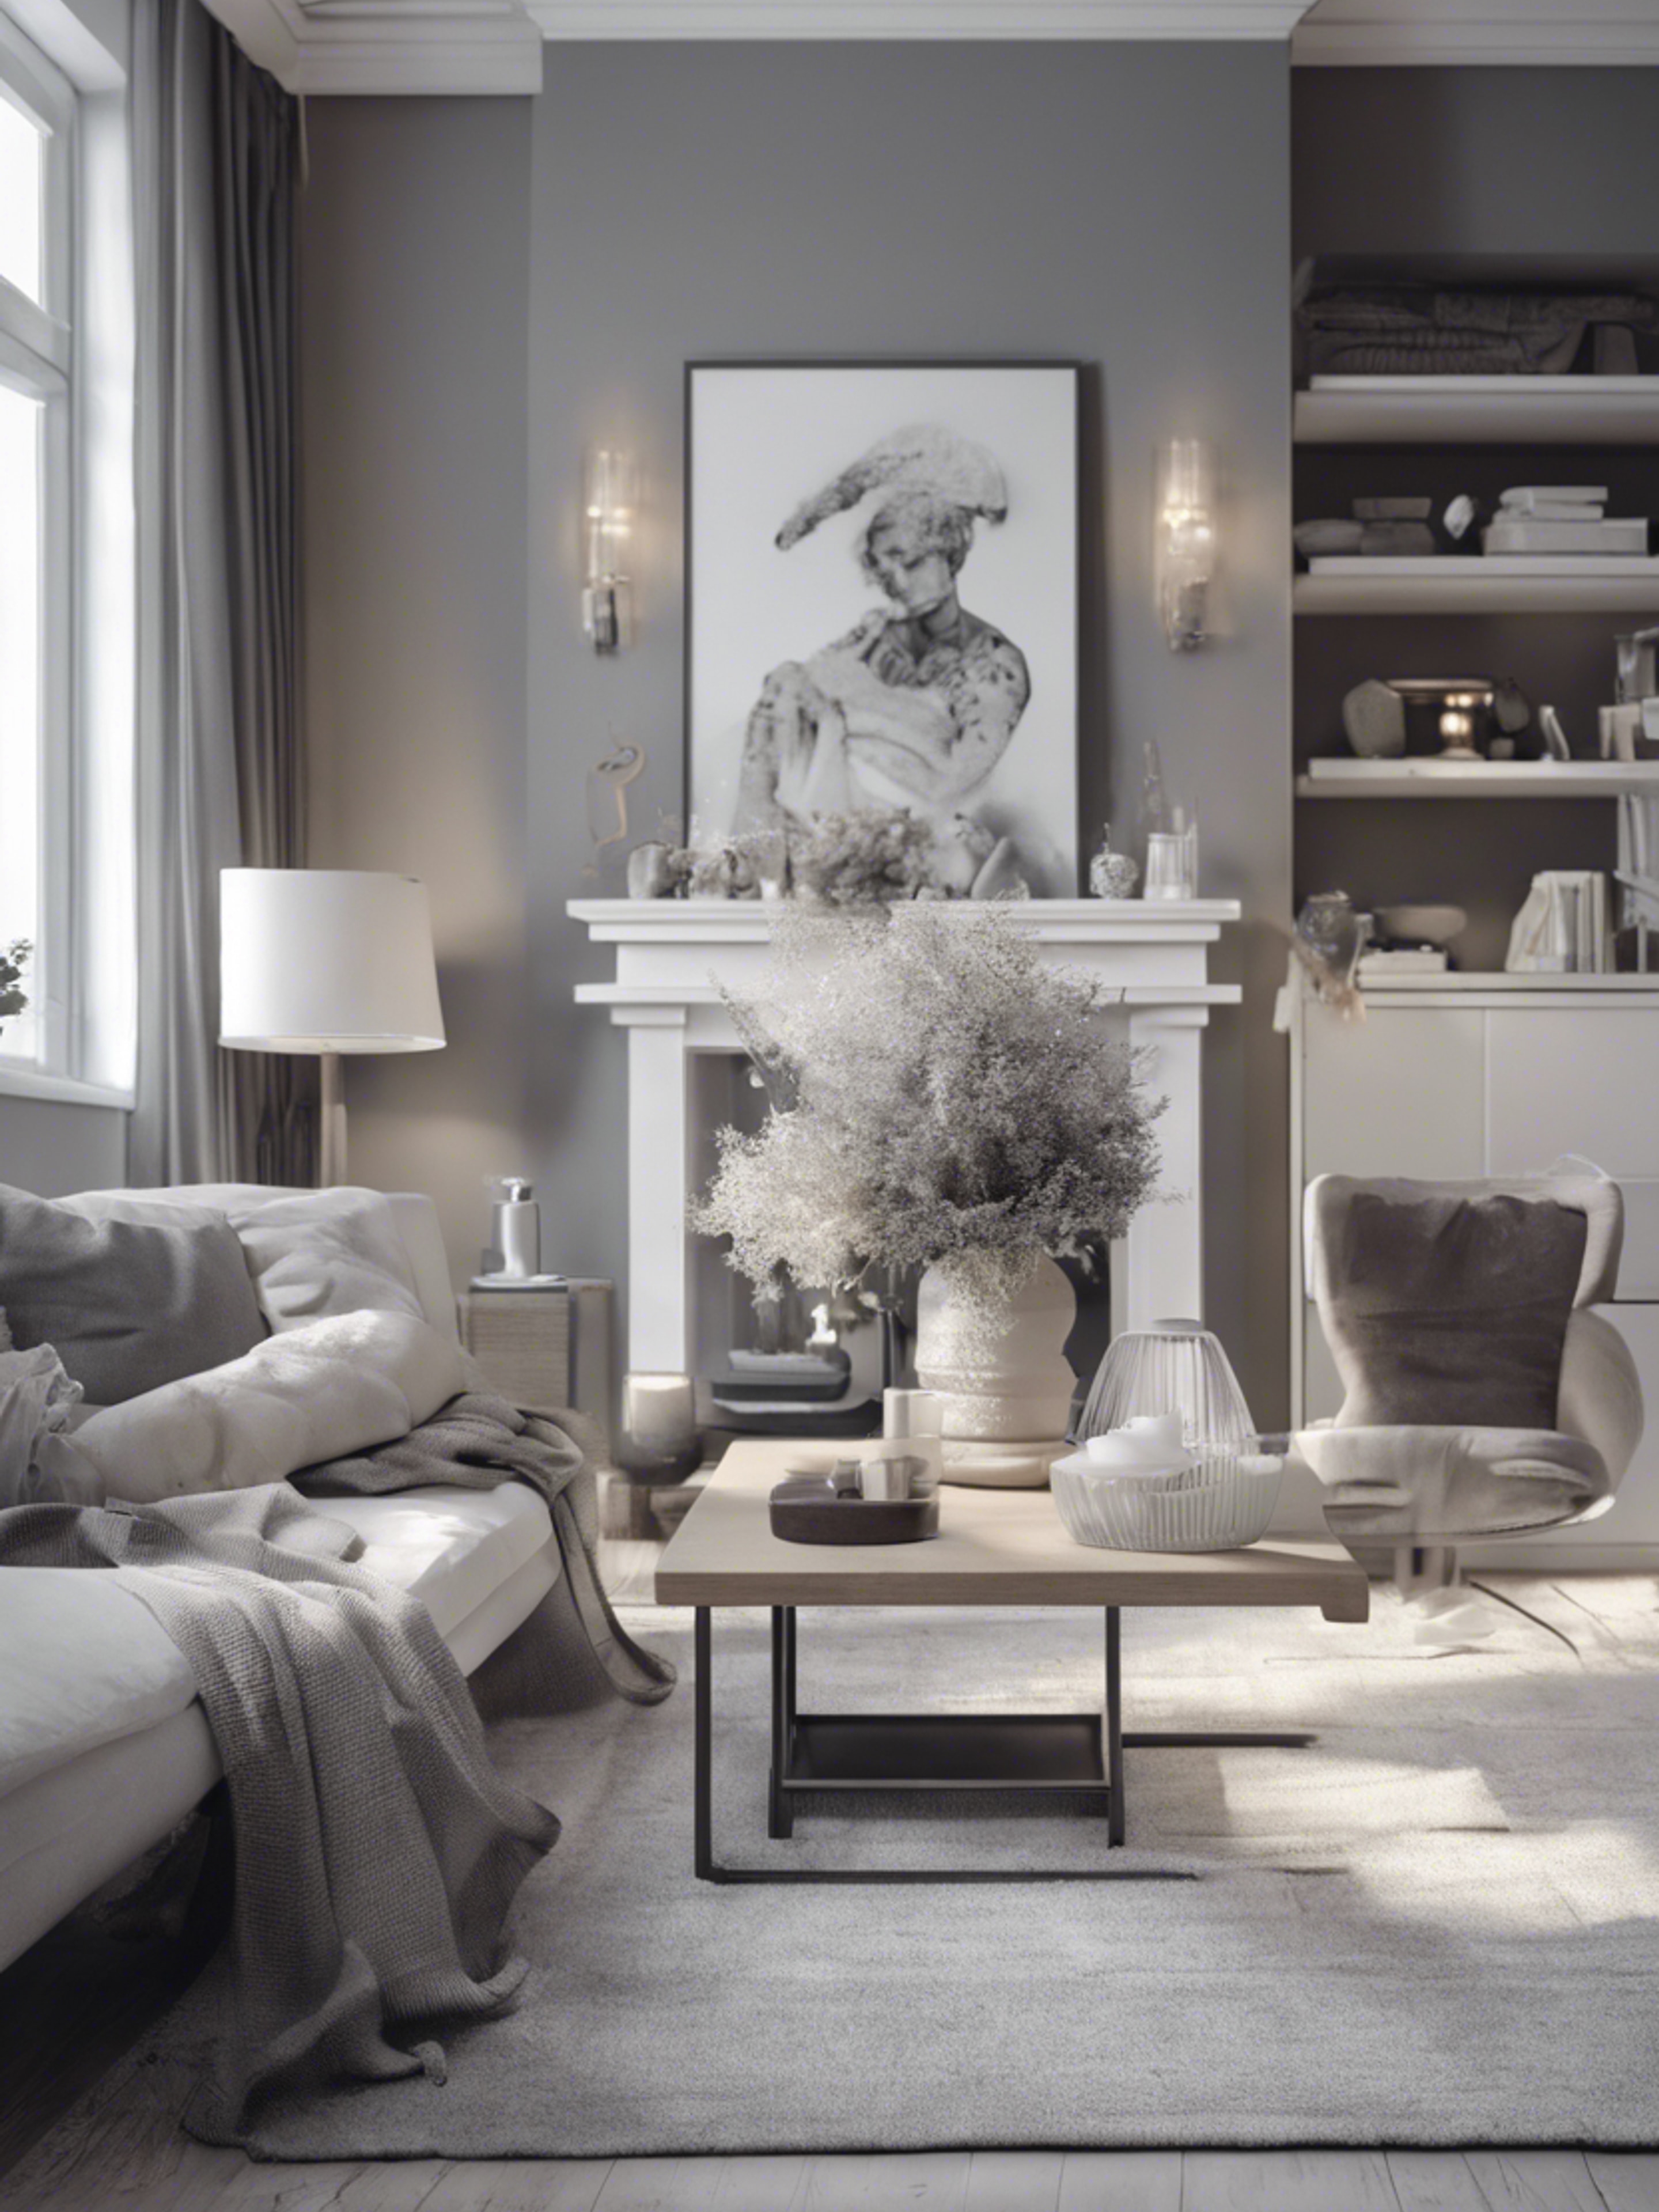 A classic interior design of a living room in neutral gray and white tones. 牆紙[b4f6eac2faba4219b360]